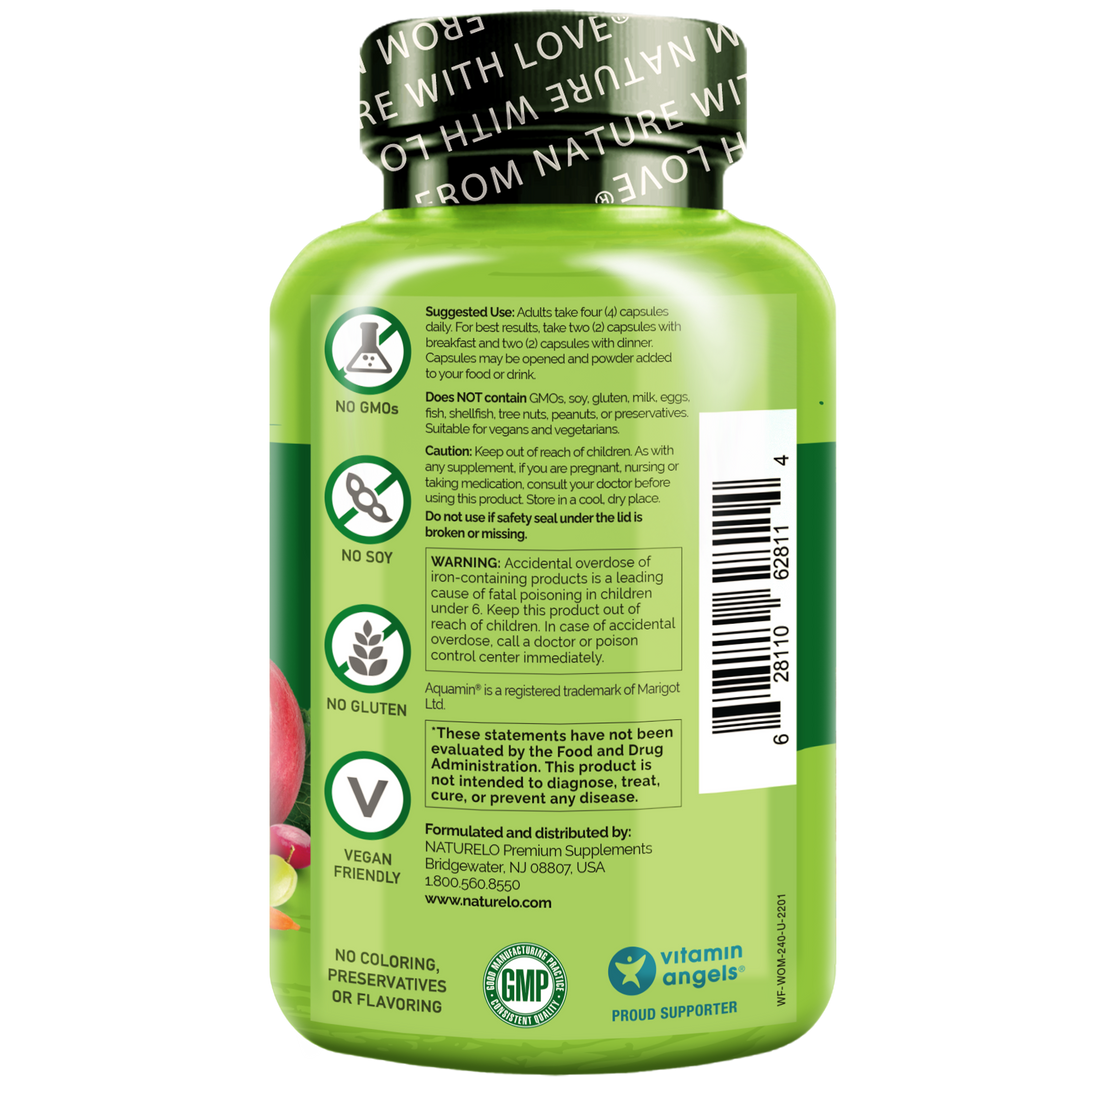 Whole Food Multivitamin for Women, Plant-Based and Vegan Friendly